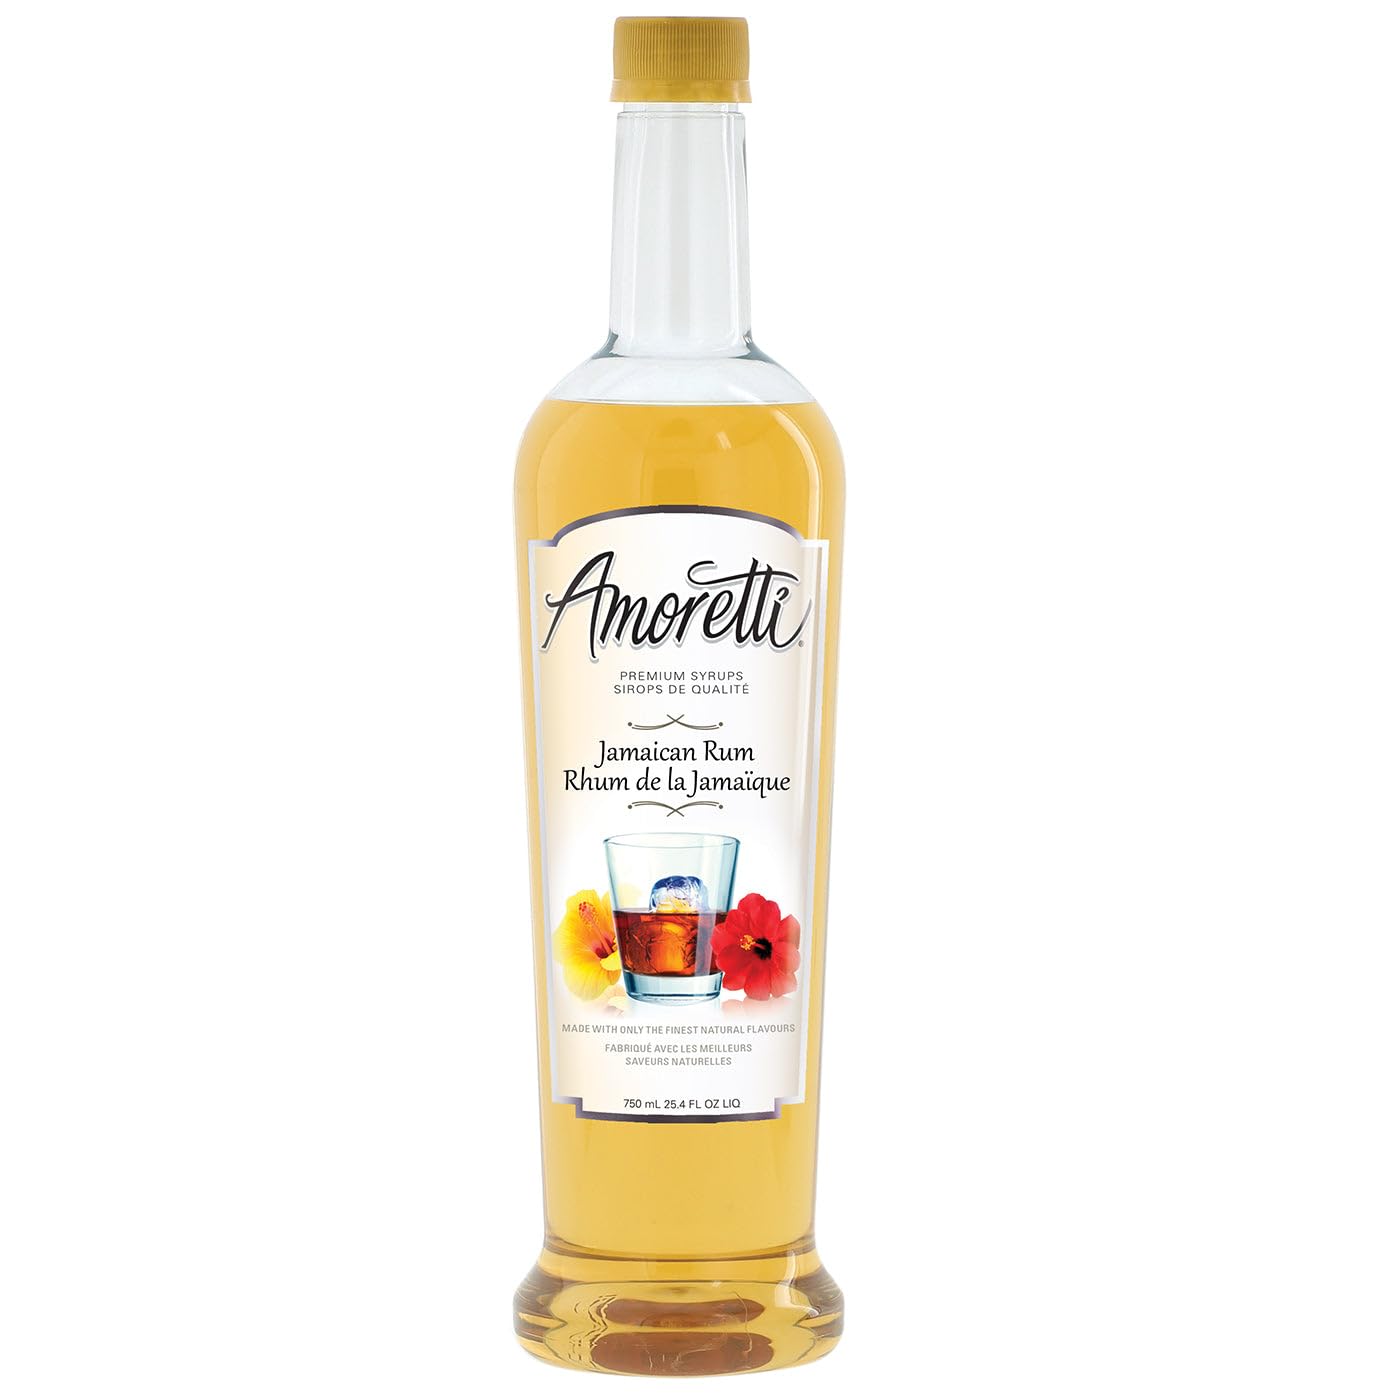 Amoretti - Premium Jamaican Rum Syrup with Pump for Flavoring Coffees, Cocktails, and other Beverages, 94 Servings Per Bottle (750 ml), Gluten Free, GMO/GEO Free, Preservative Free